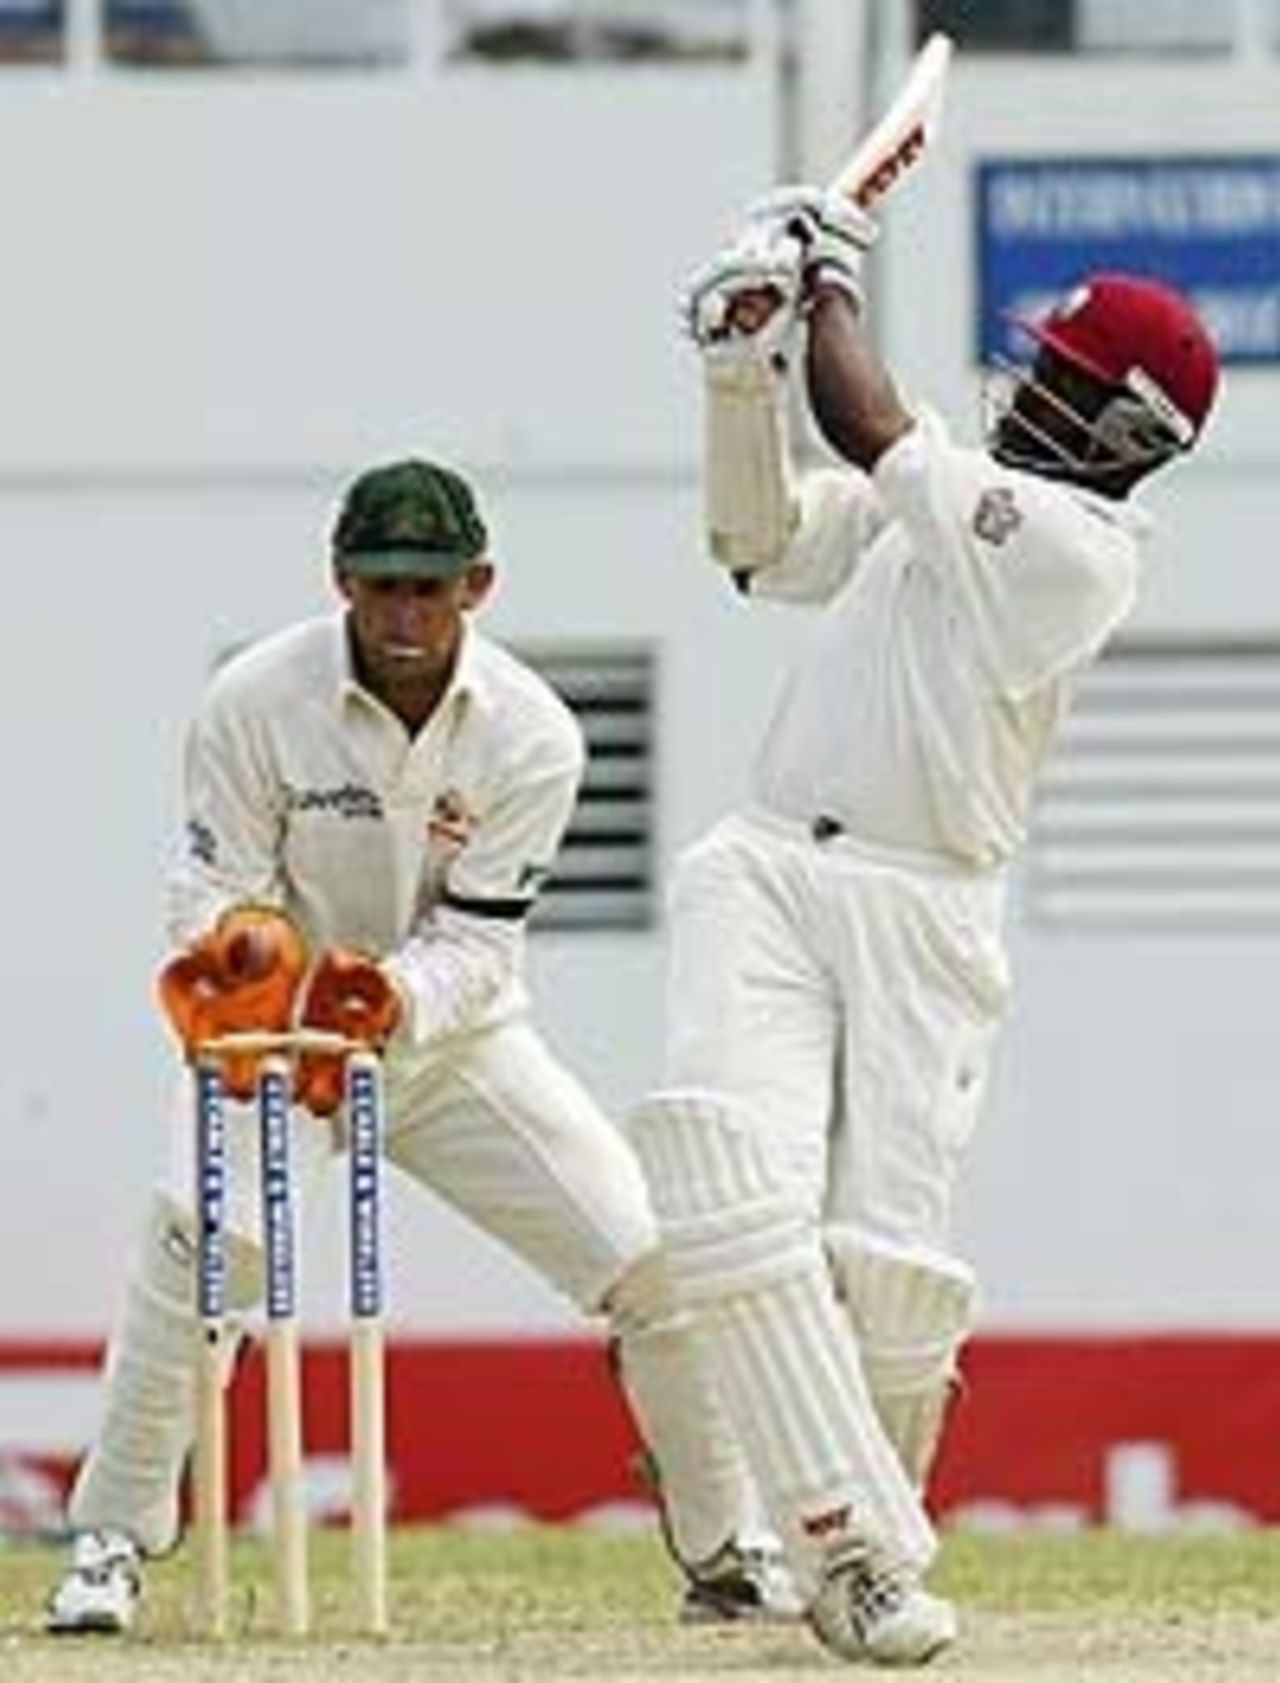 ST JOHN'S, ANTIGUA - MAY 12: Brian Lara of the West Indies is bowled by Stuart MacGill of Australia during day four of the Fourth Test between the West Indies and Australia on May 12, 2003. played at the Recreation Oval, St John's, Antigua.